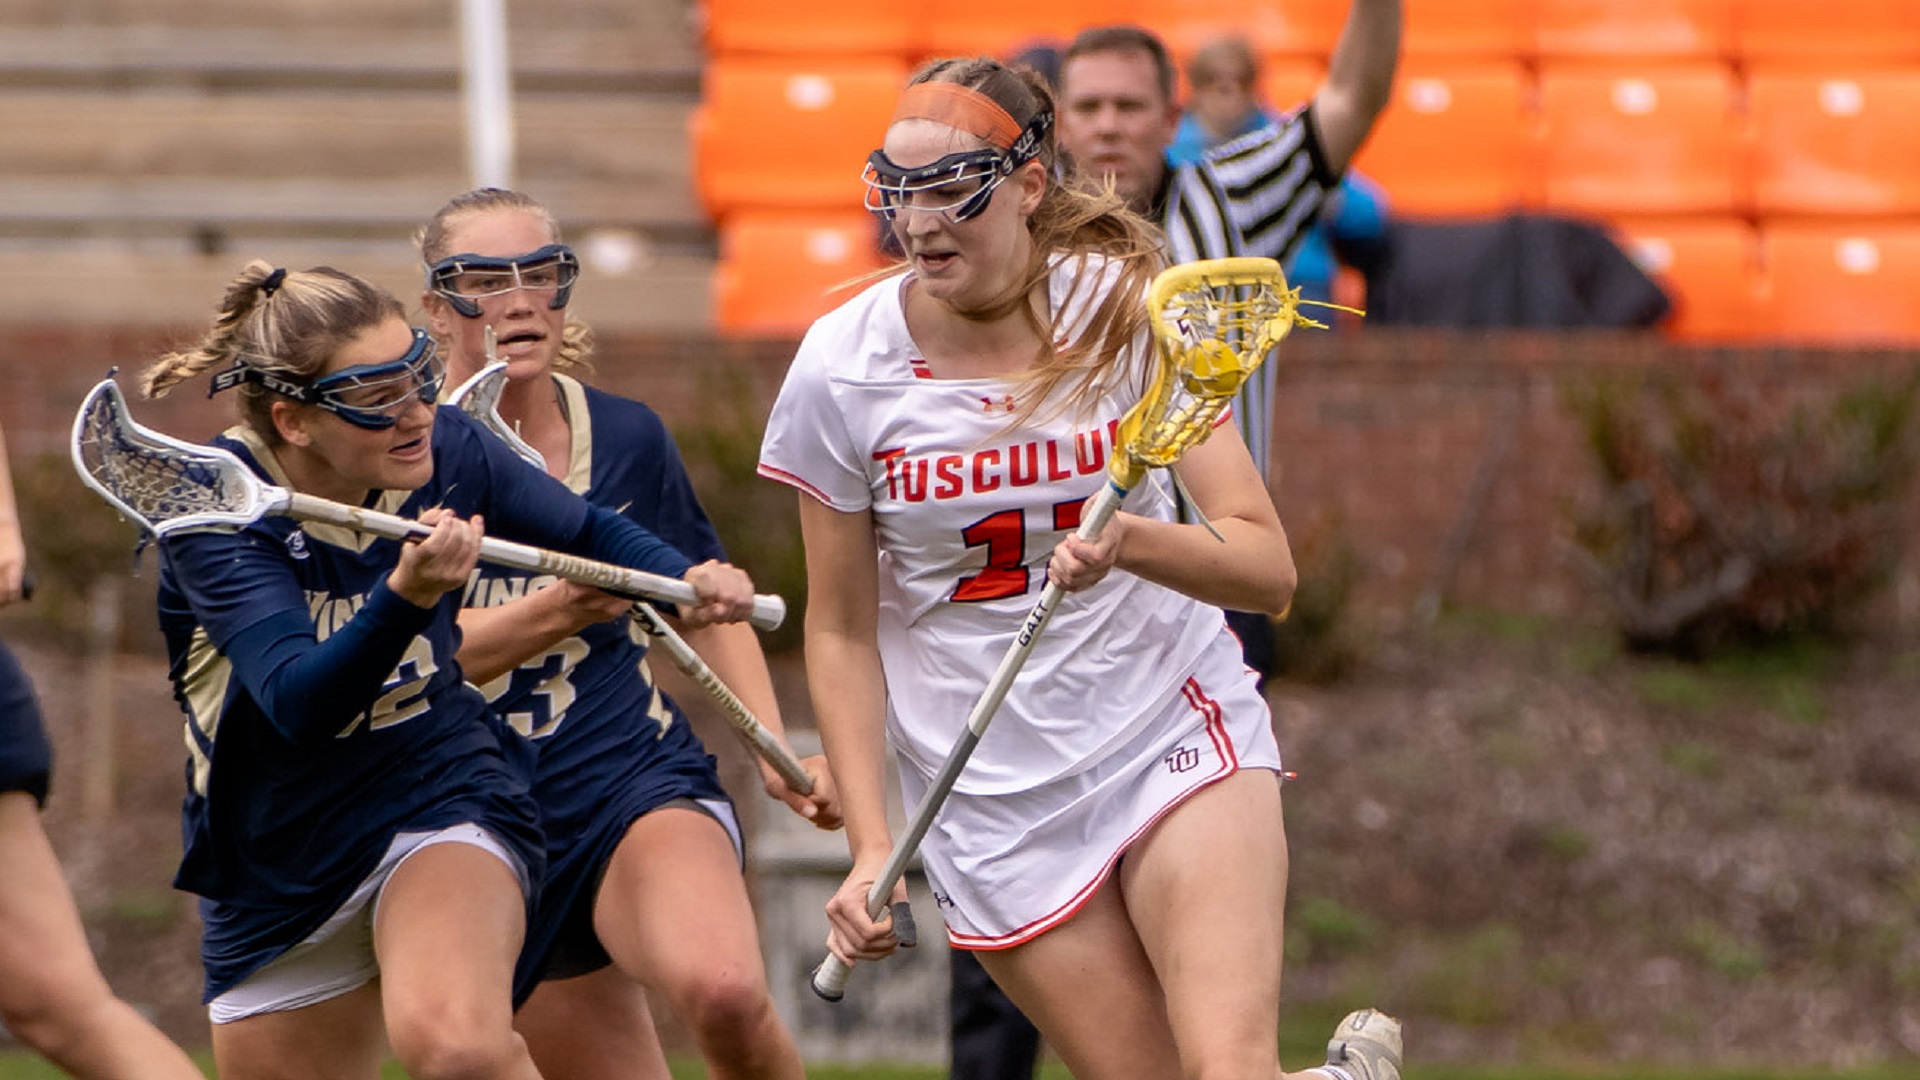 Zuza Stasiak scored two goals for the Pioneers against Wingate (photo by Kari Ham)